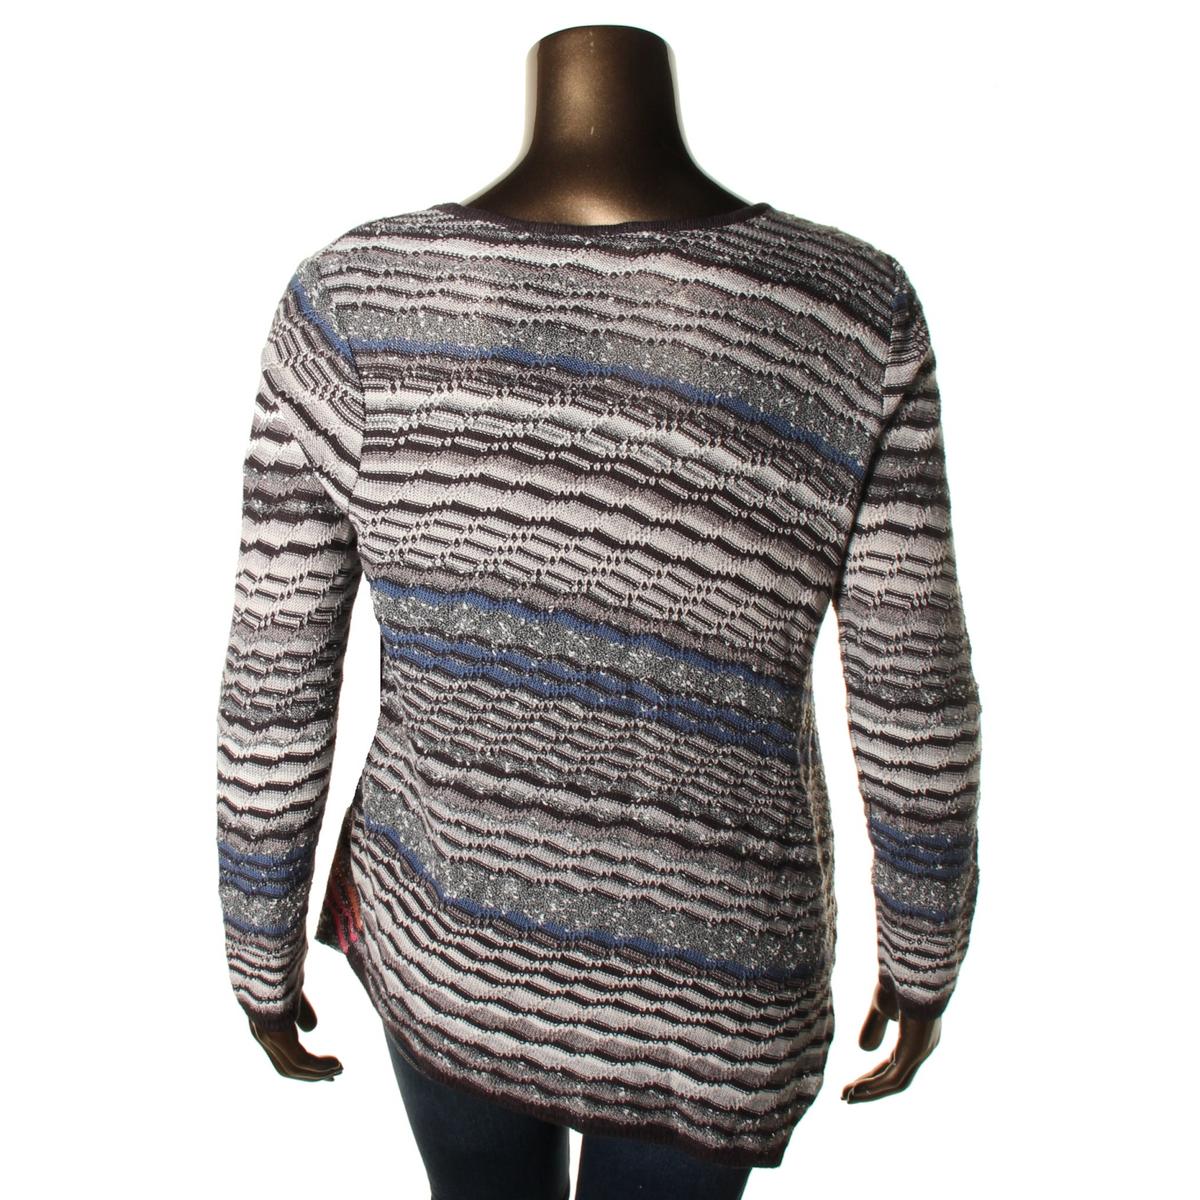 Nic + Zoe Womens Striped Asymmetrical Pullover Sweater